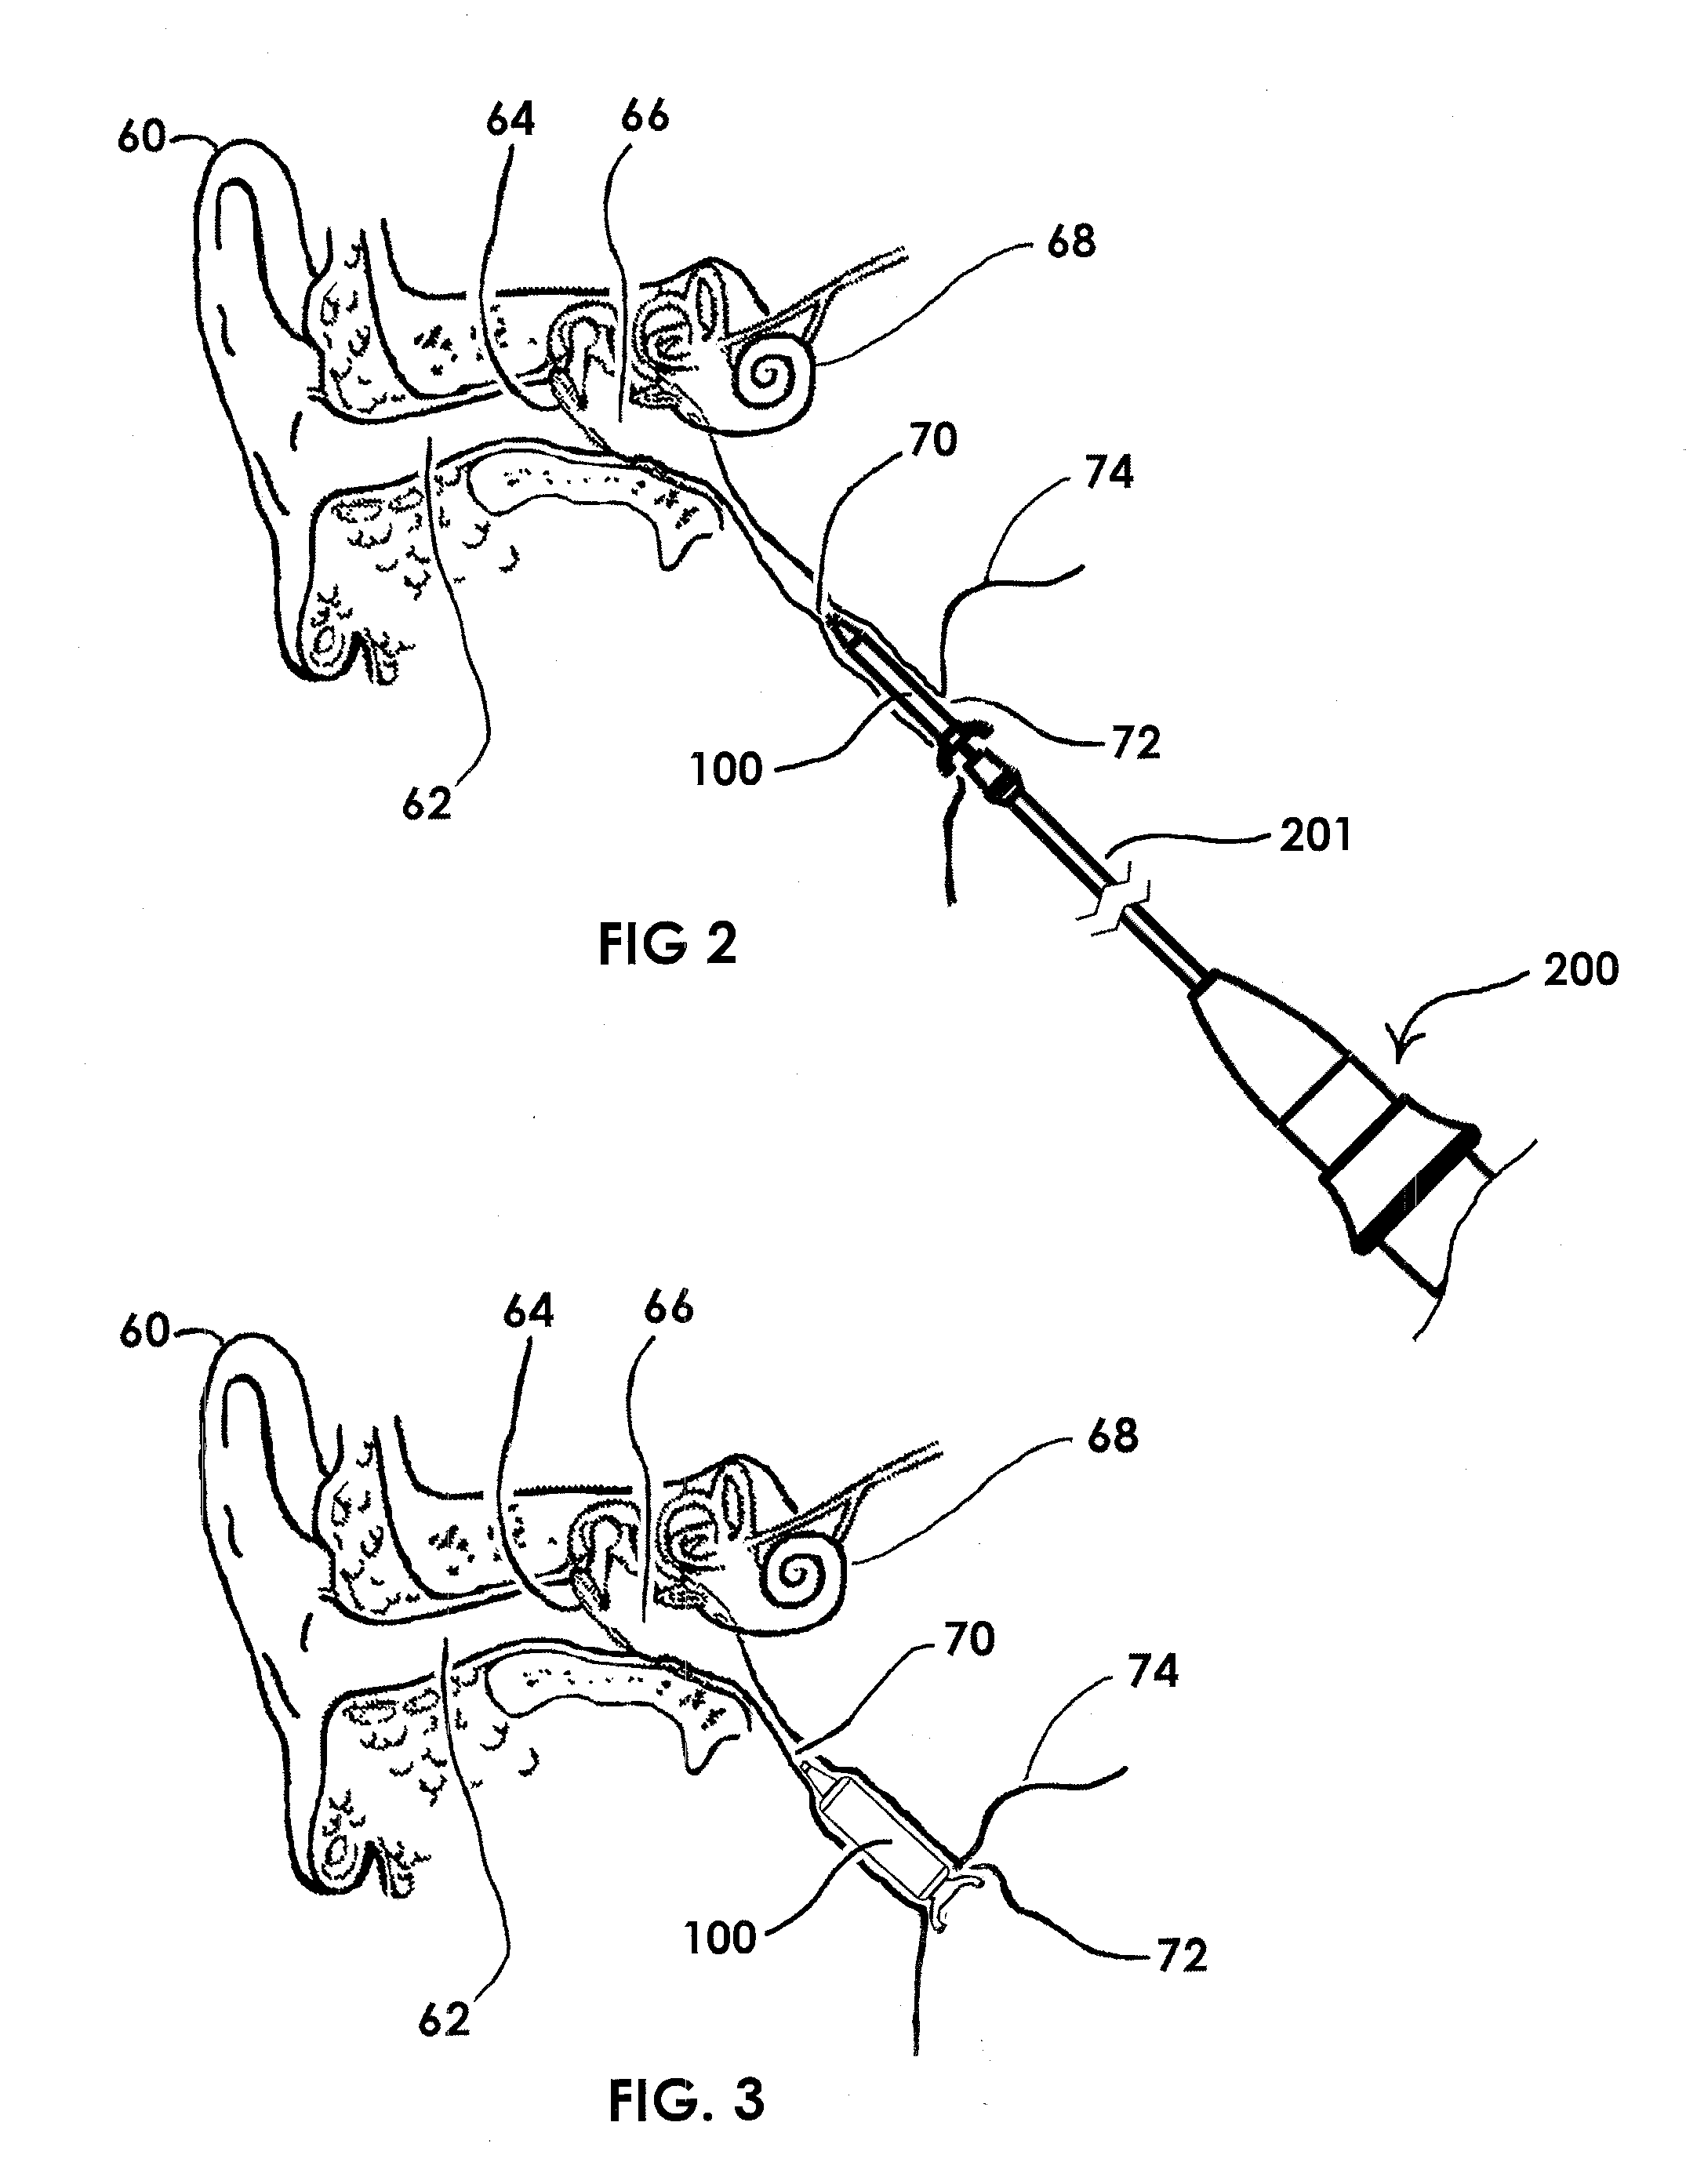 Devices and methods for Dilating a Eustachian Tube